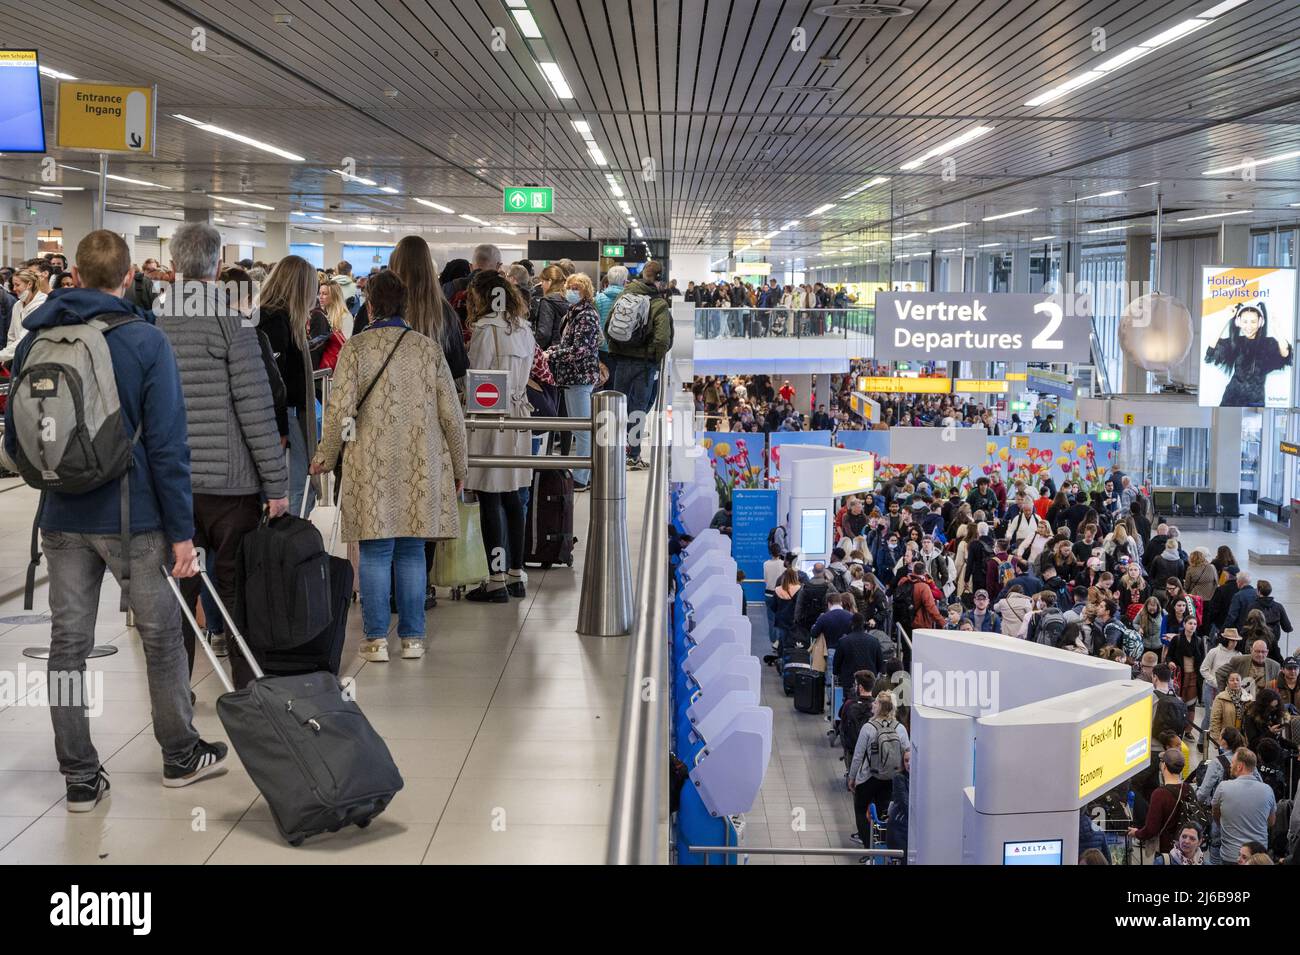 Schiphol, Netherlands. 30th Apr, 2022. 2022-04-30 07:01:20 SCHIPHOL - Schiphol Airport is very busy this weekend. The airport is facing serious staff shortages because there are hundreds of vacancies at the check-in desks, security and in the baggage basement that cannot be filled. ANP EVERT ELZINGA netherlands out - belgium out Credit: ANP/Alamy Live News Stock Photo